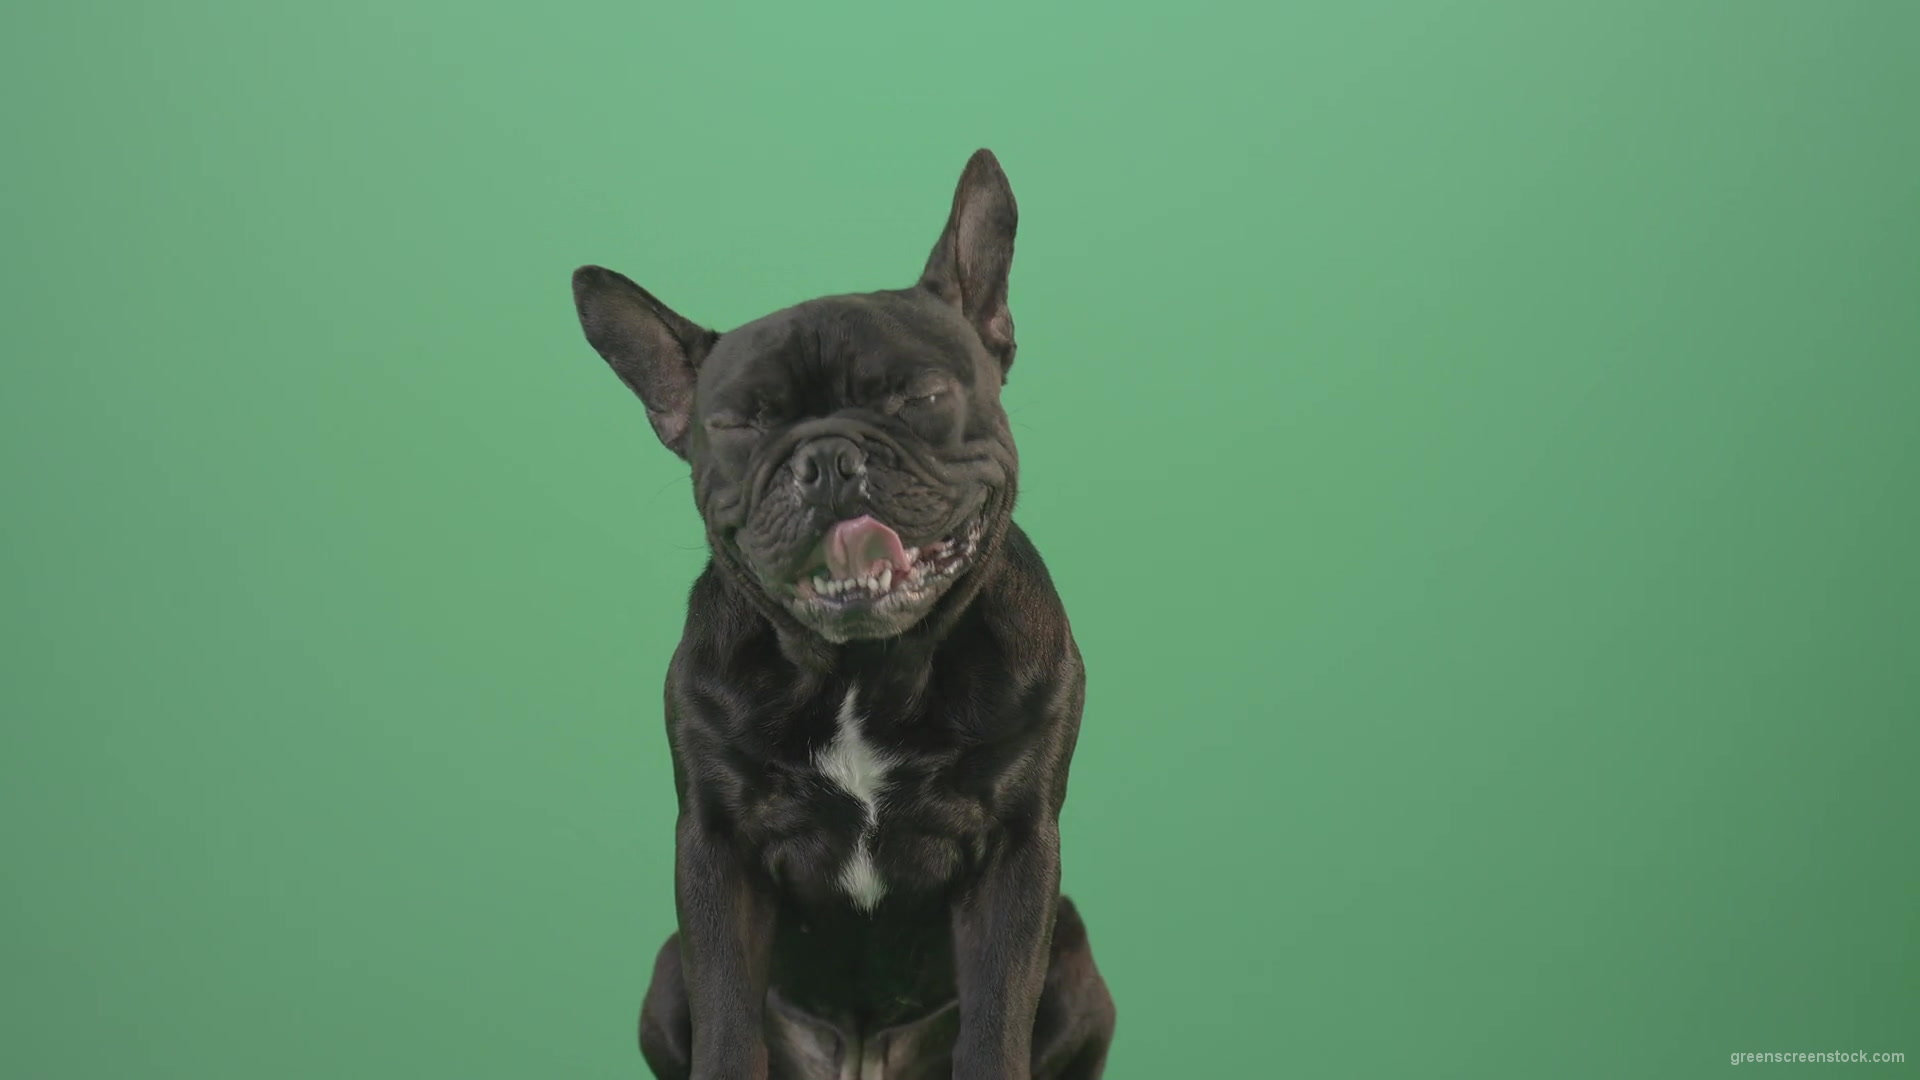 Hard-breathing-french-black-bull-dog-over-green-screen-4K-Video-Footage-1920_002 Green Screen Stock